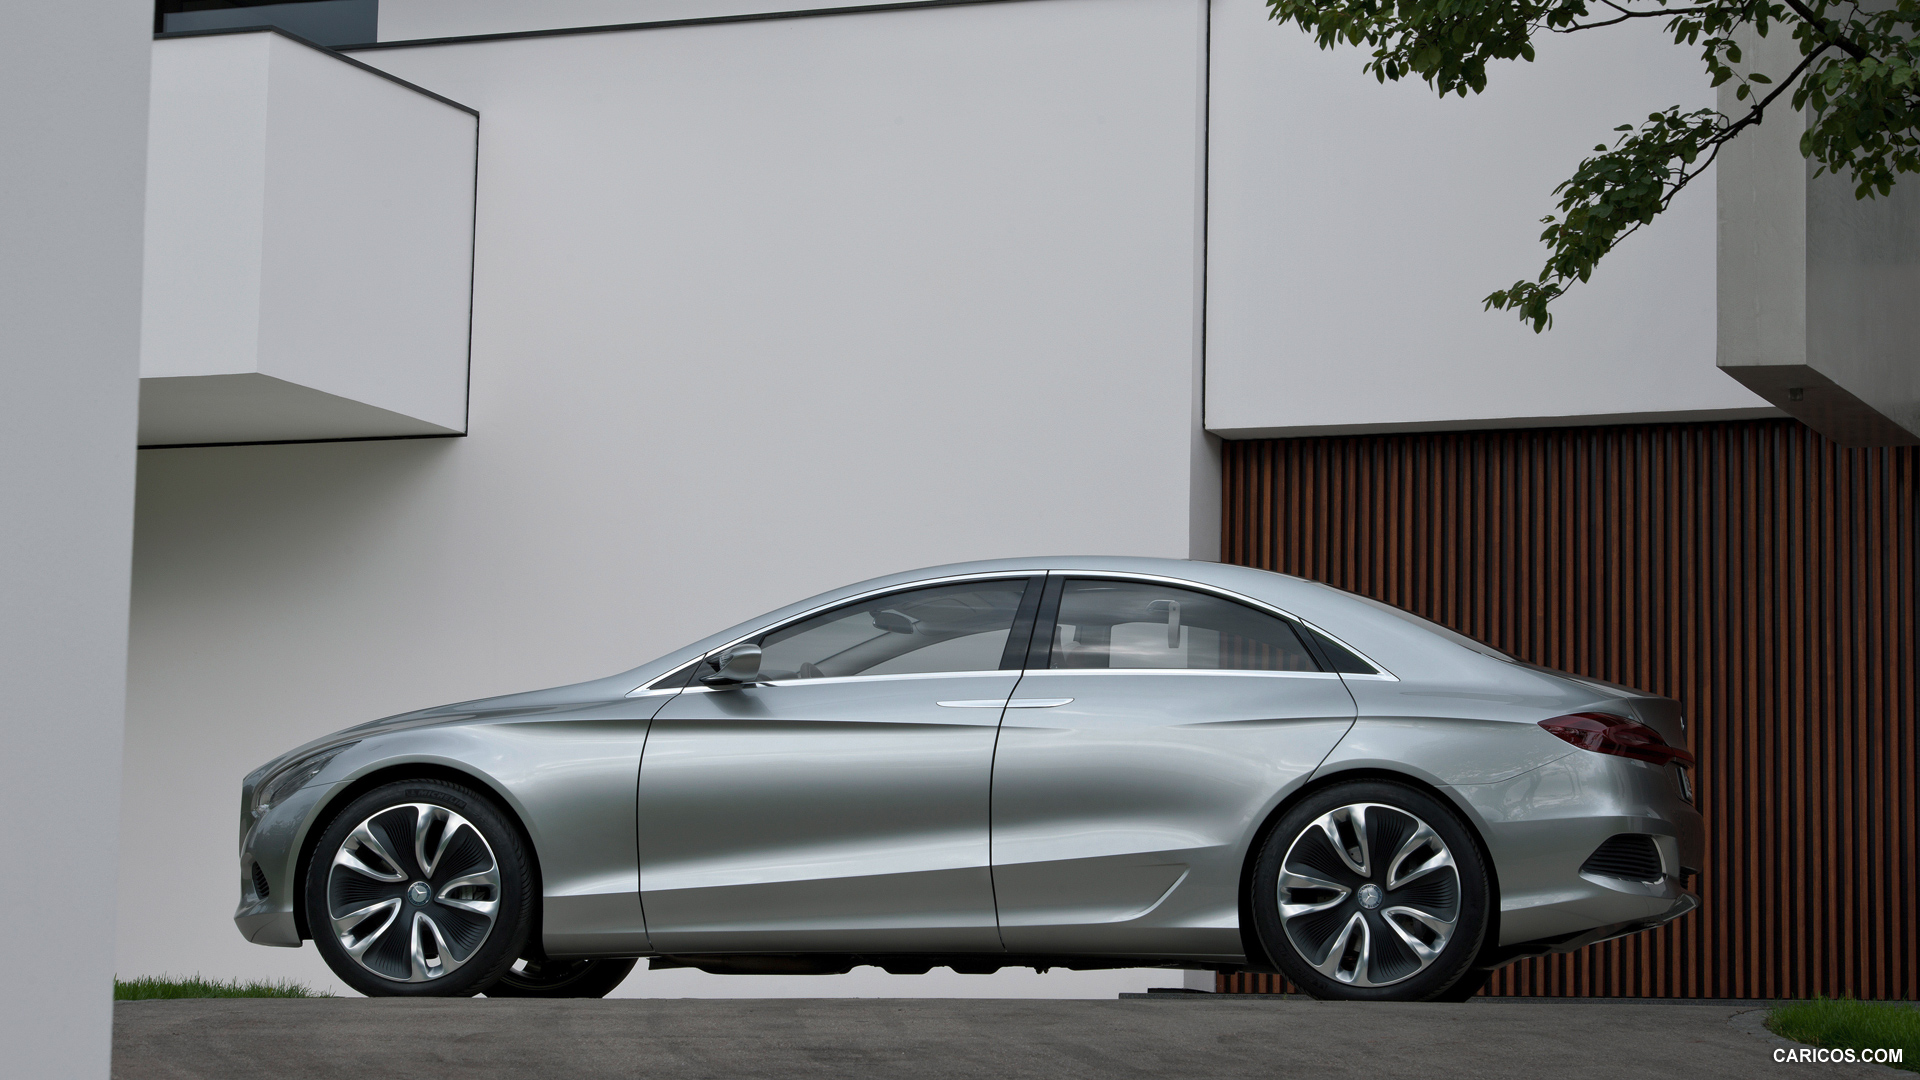 Mercedes-Benz F800 Style Concept (2010)  - Side, #34 of 120